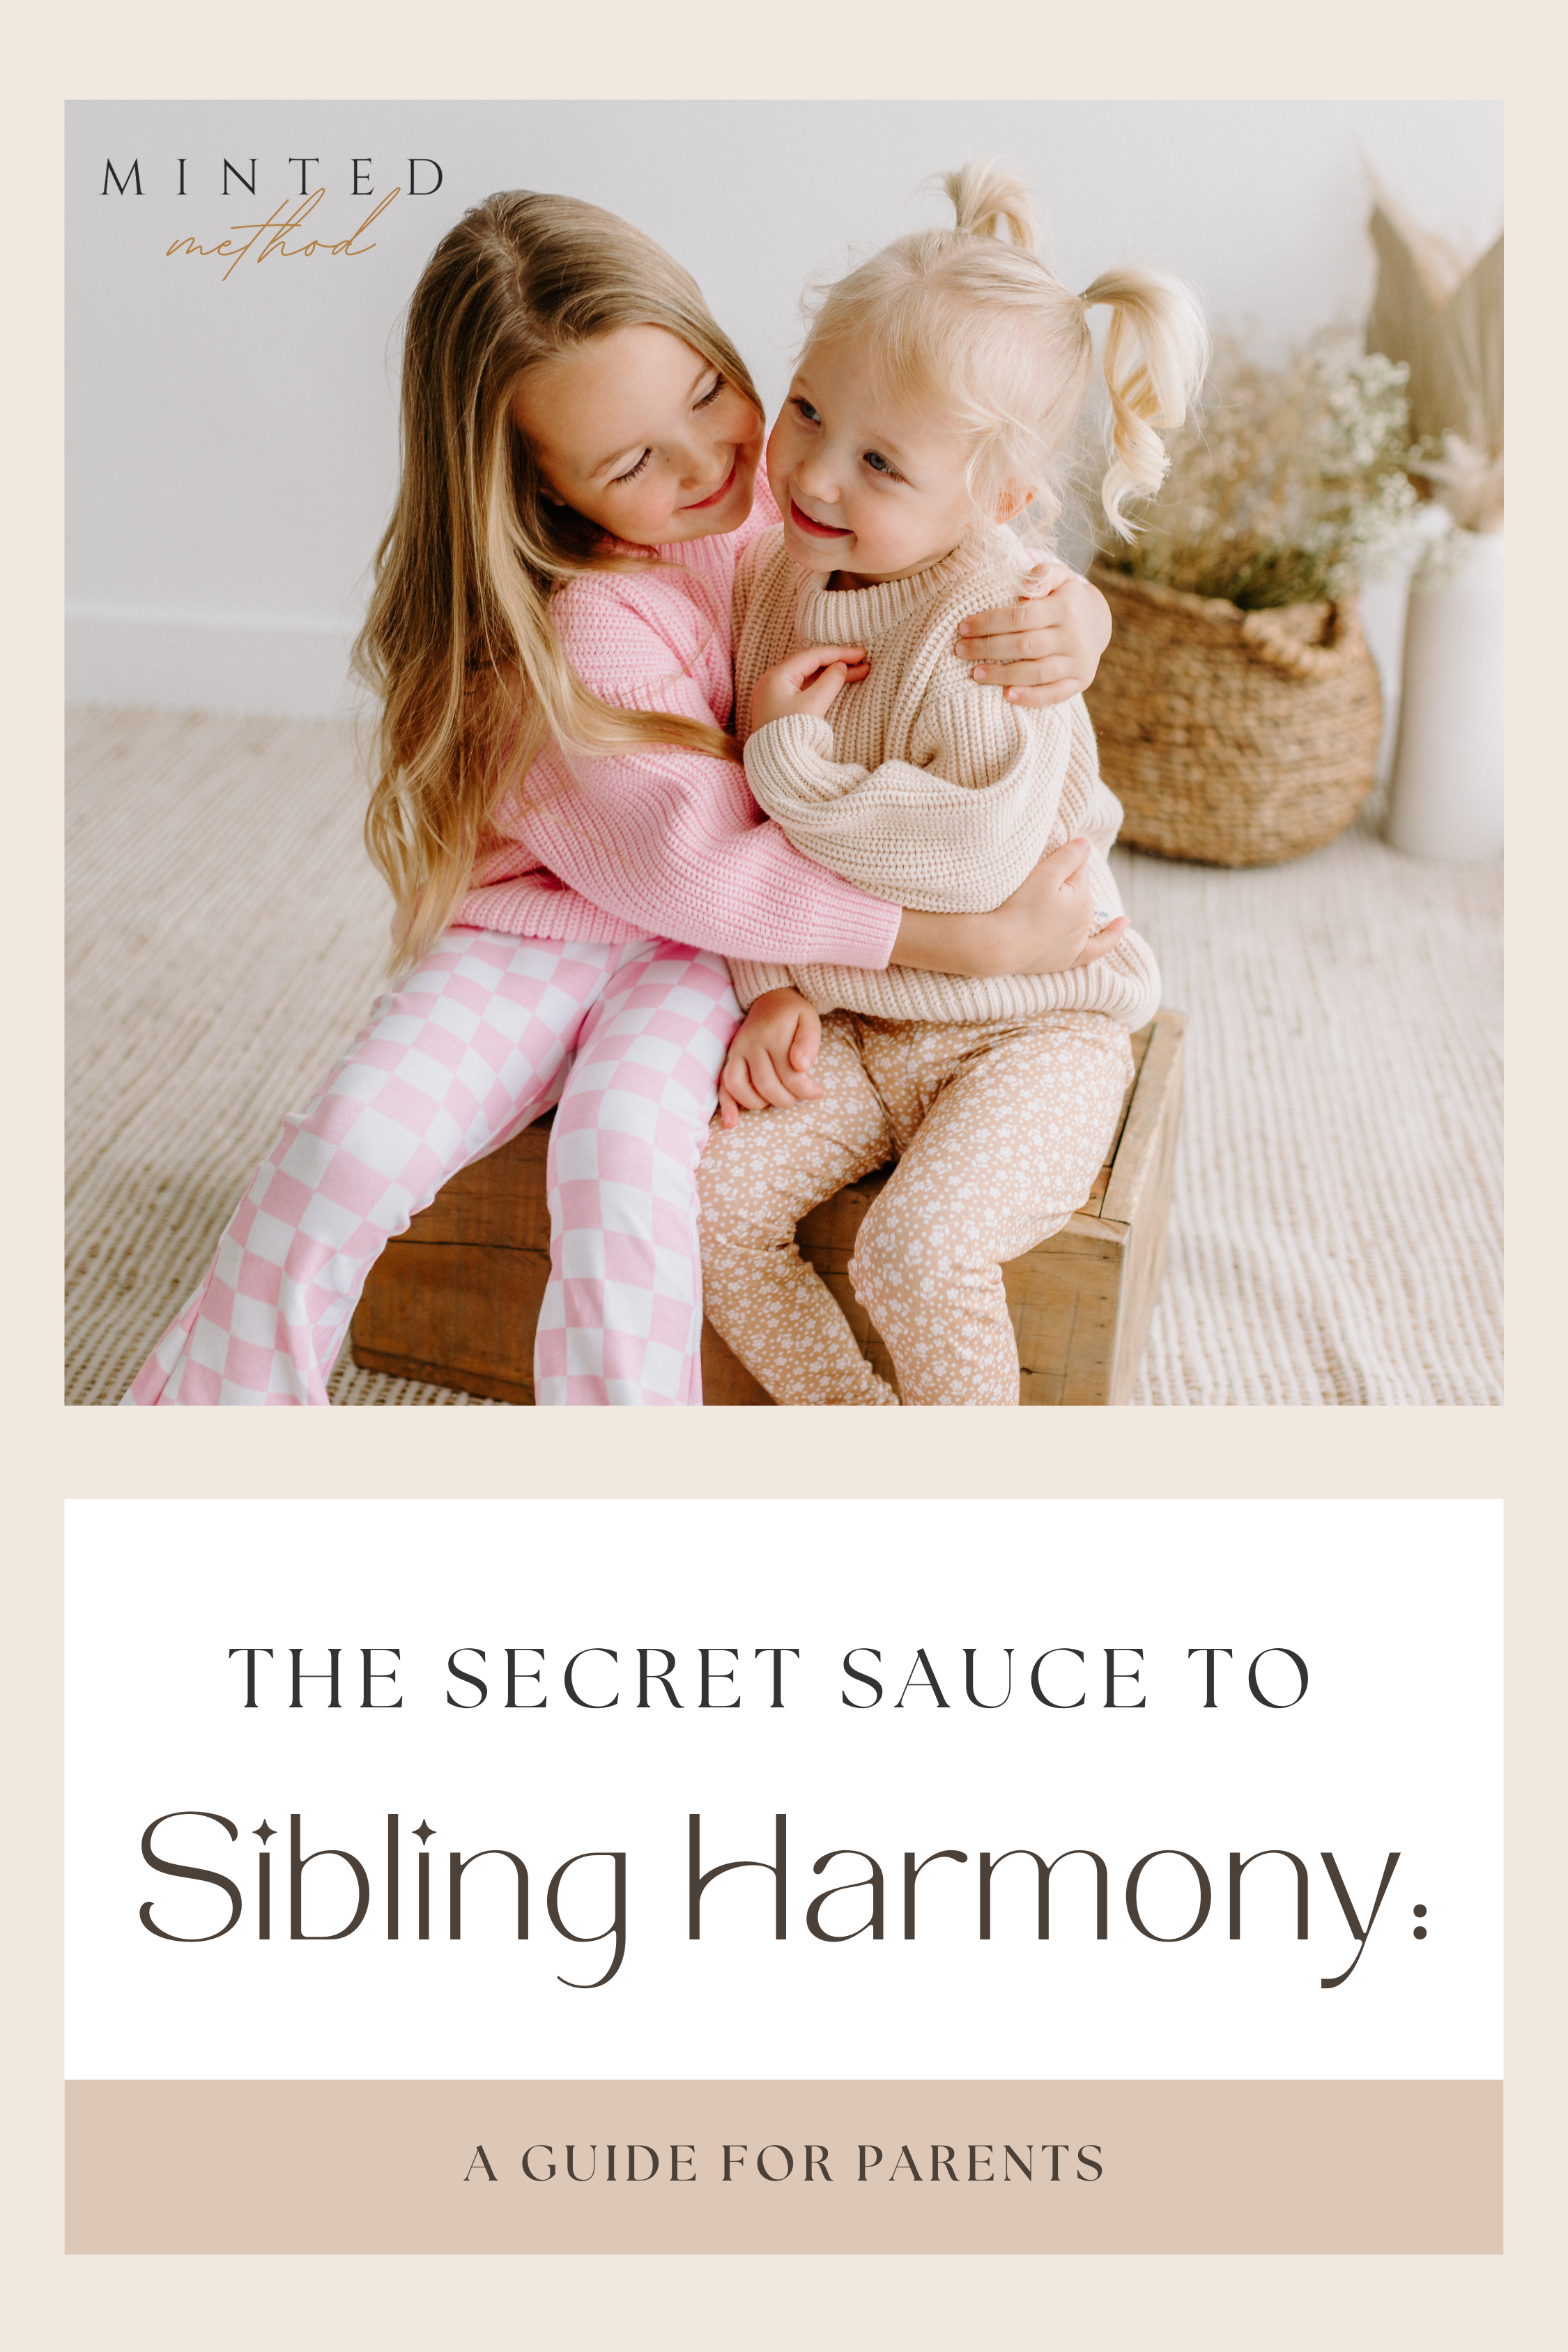 The Secret Sauce to Sibling Harmony: A Guide for Parents